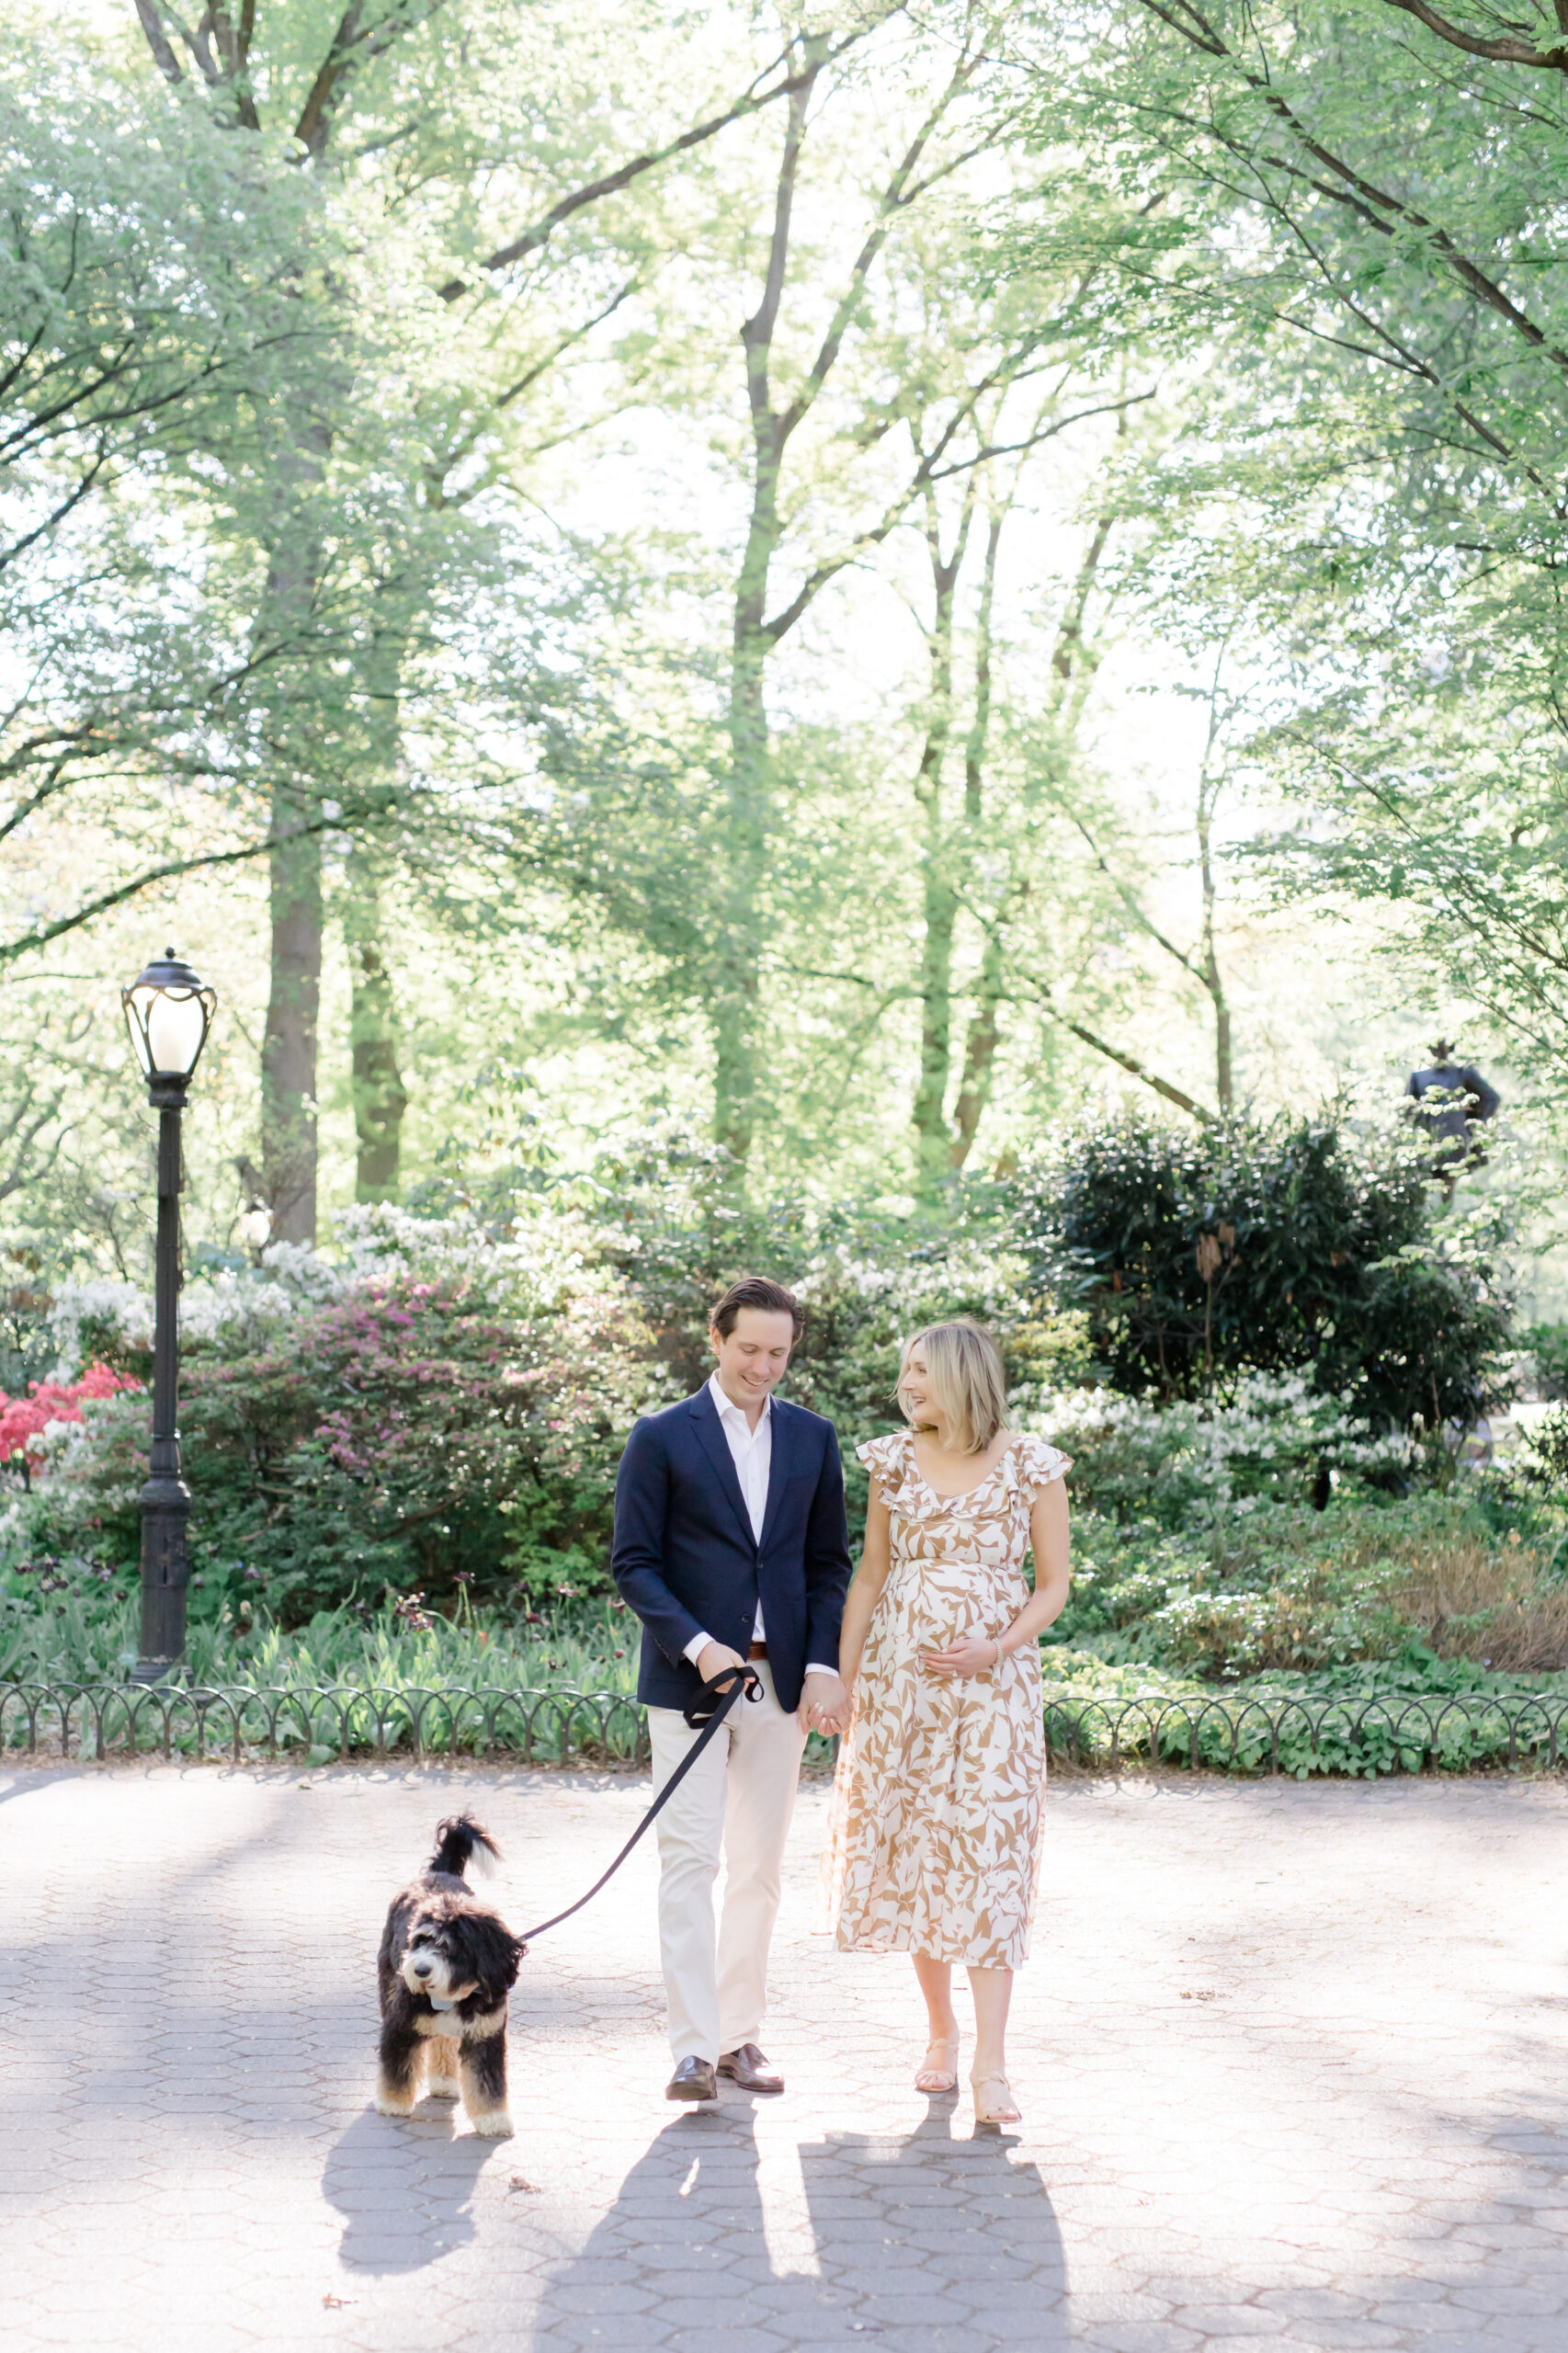 An expecting mom and her husband walk with their dog at a maternity photo session in Central Park shot by Jacqueline Clair Photography